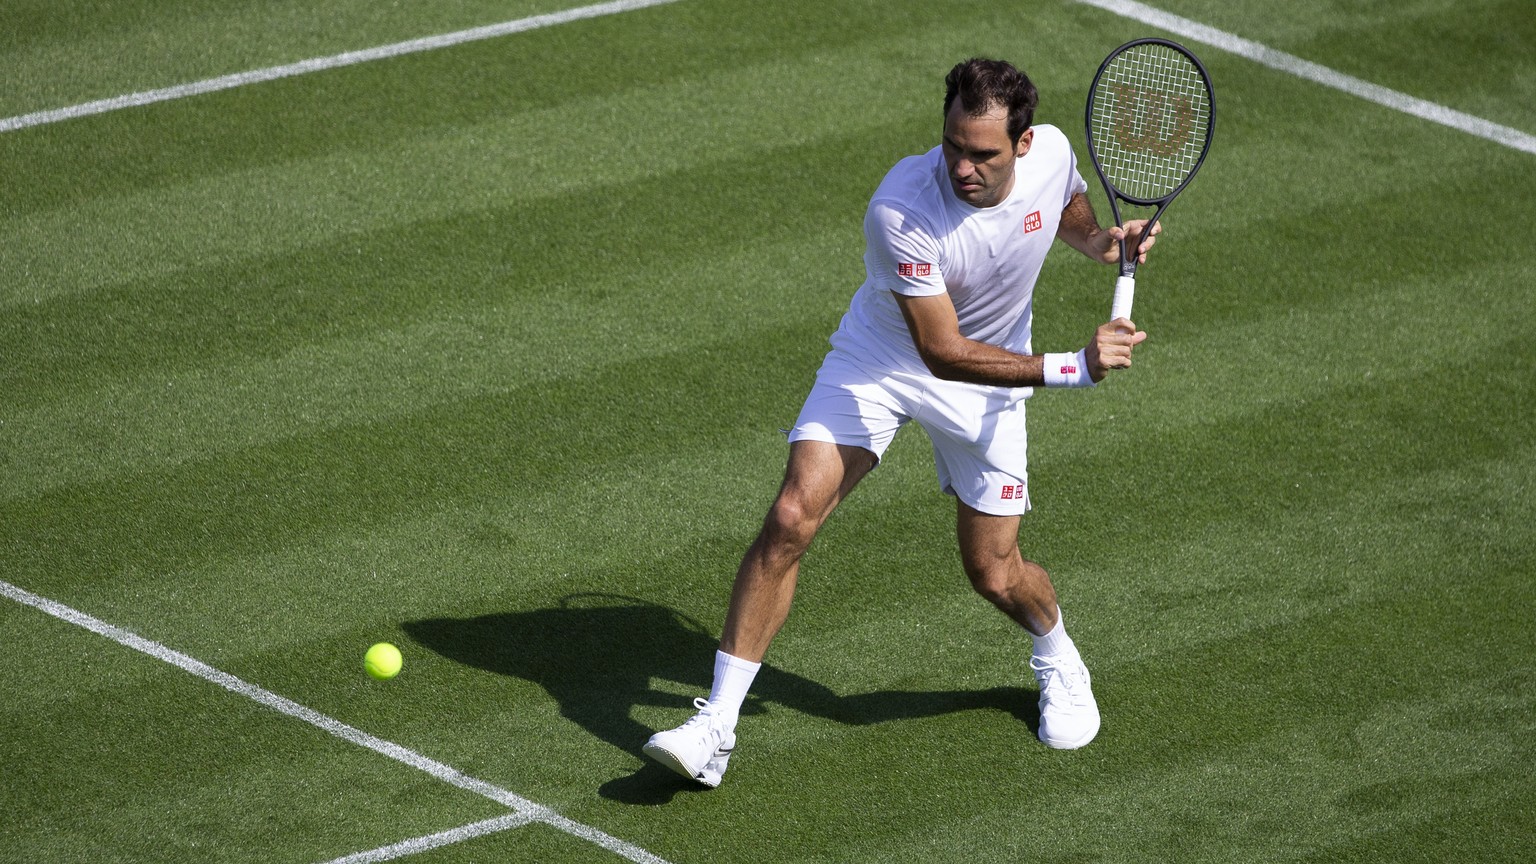 Roger Federer of Switzerland hits a ball during training session at the All England Lawn Tennis Championships in Wimbledon, London, on Wednesday, June 26, 2019. The Wimbledon Tennis Championships 2019 ...